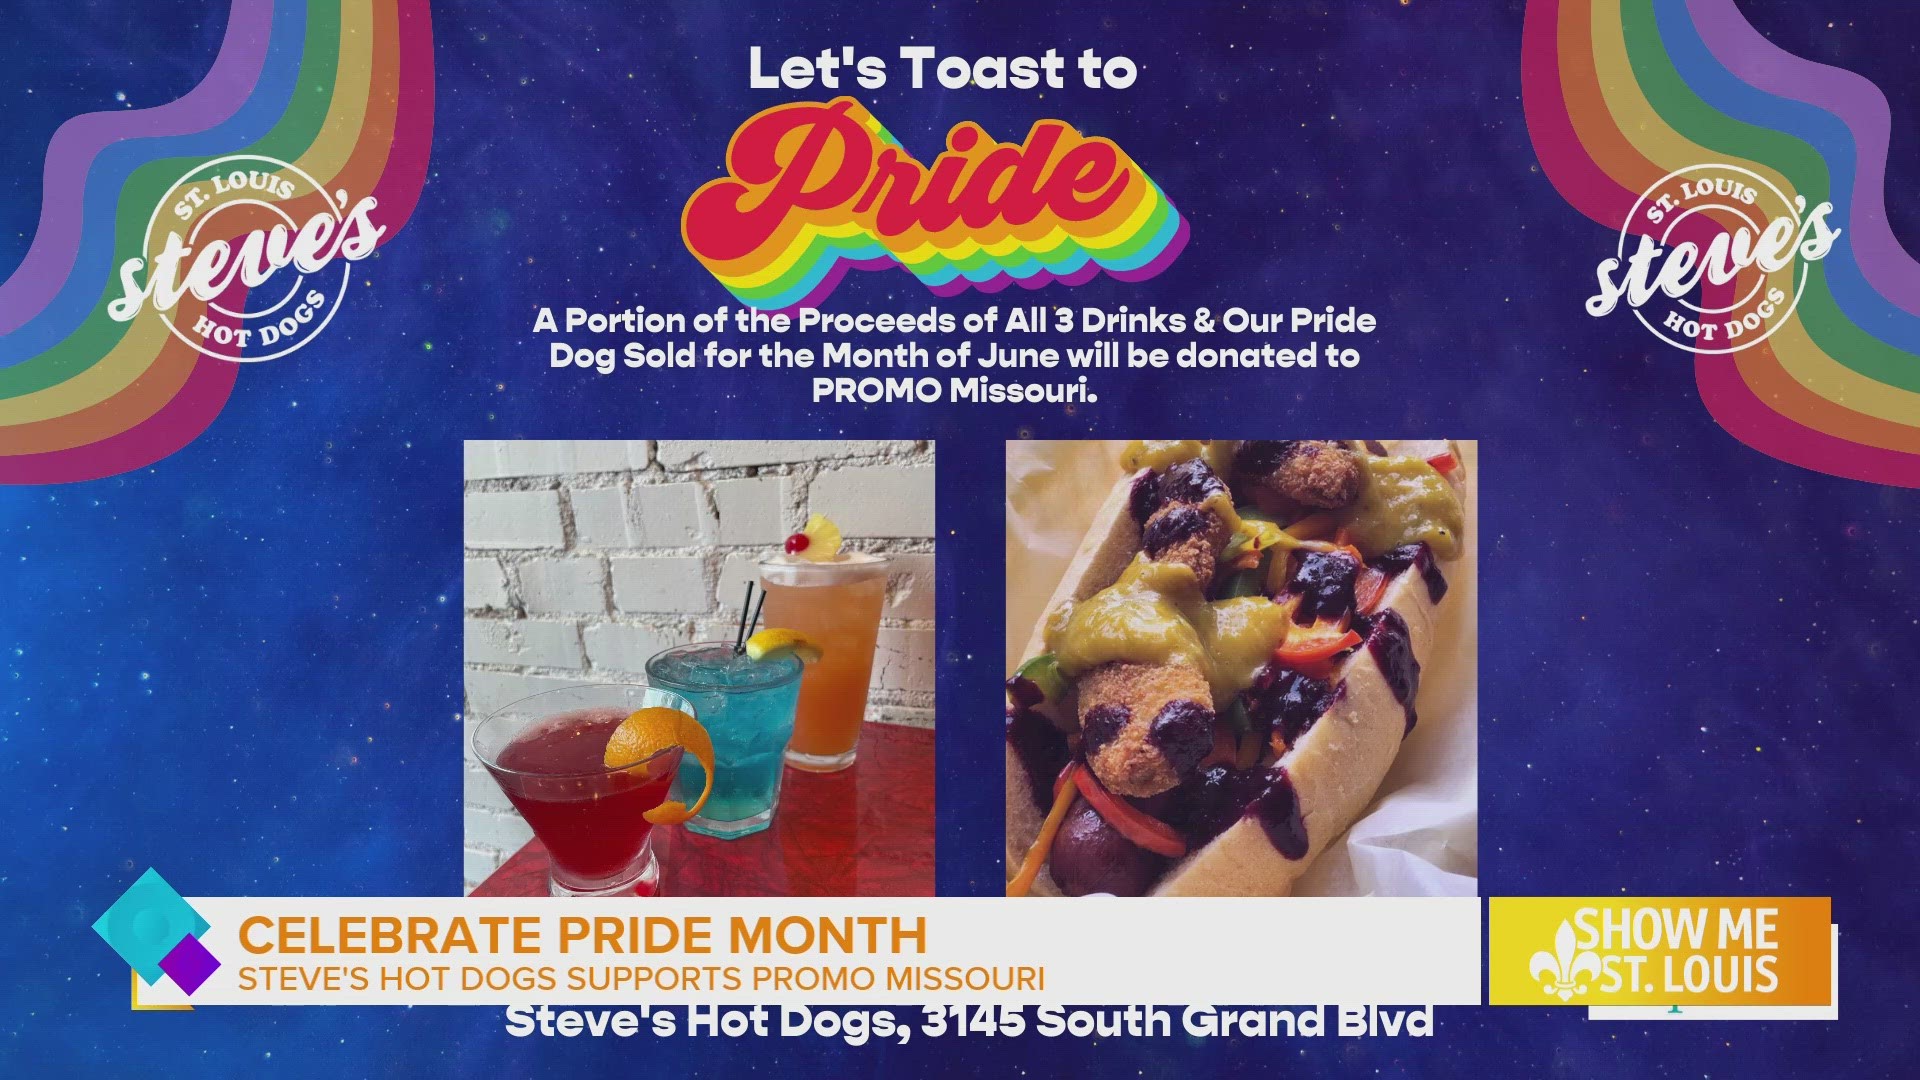 A portion of the proceeds from every PRIDE drink and PRIDE dog sold will go to support the work of PROMO Missouri.